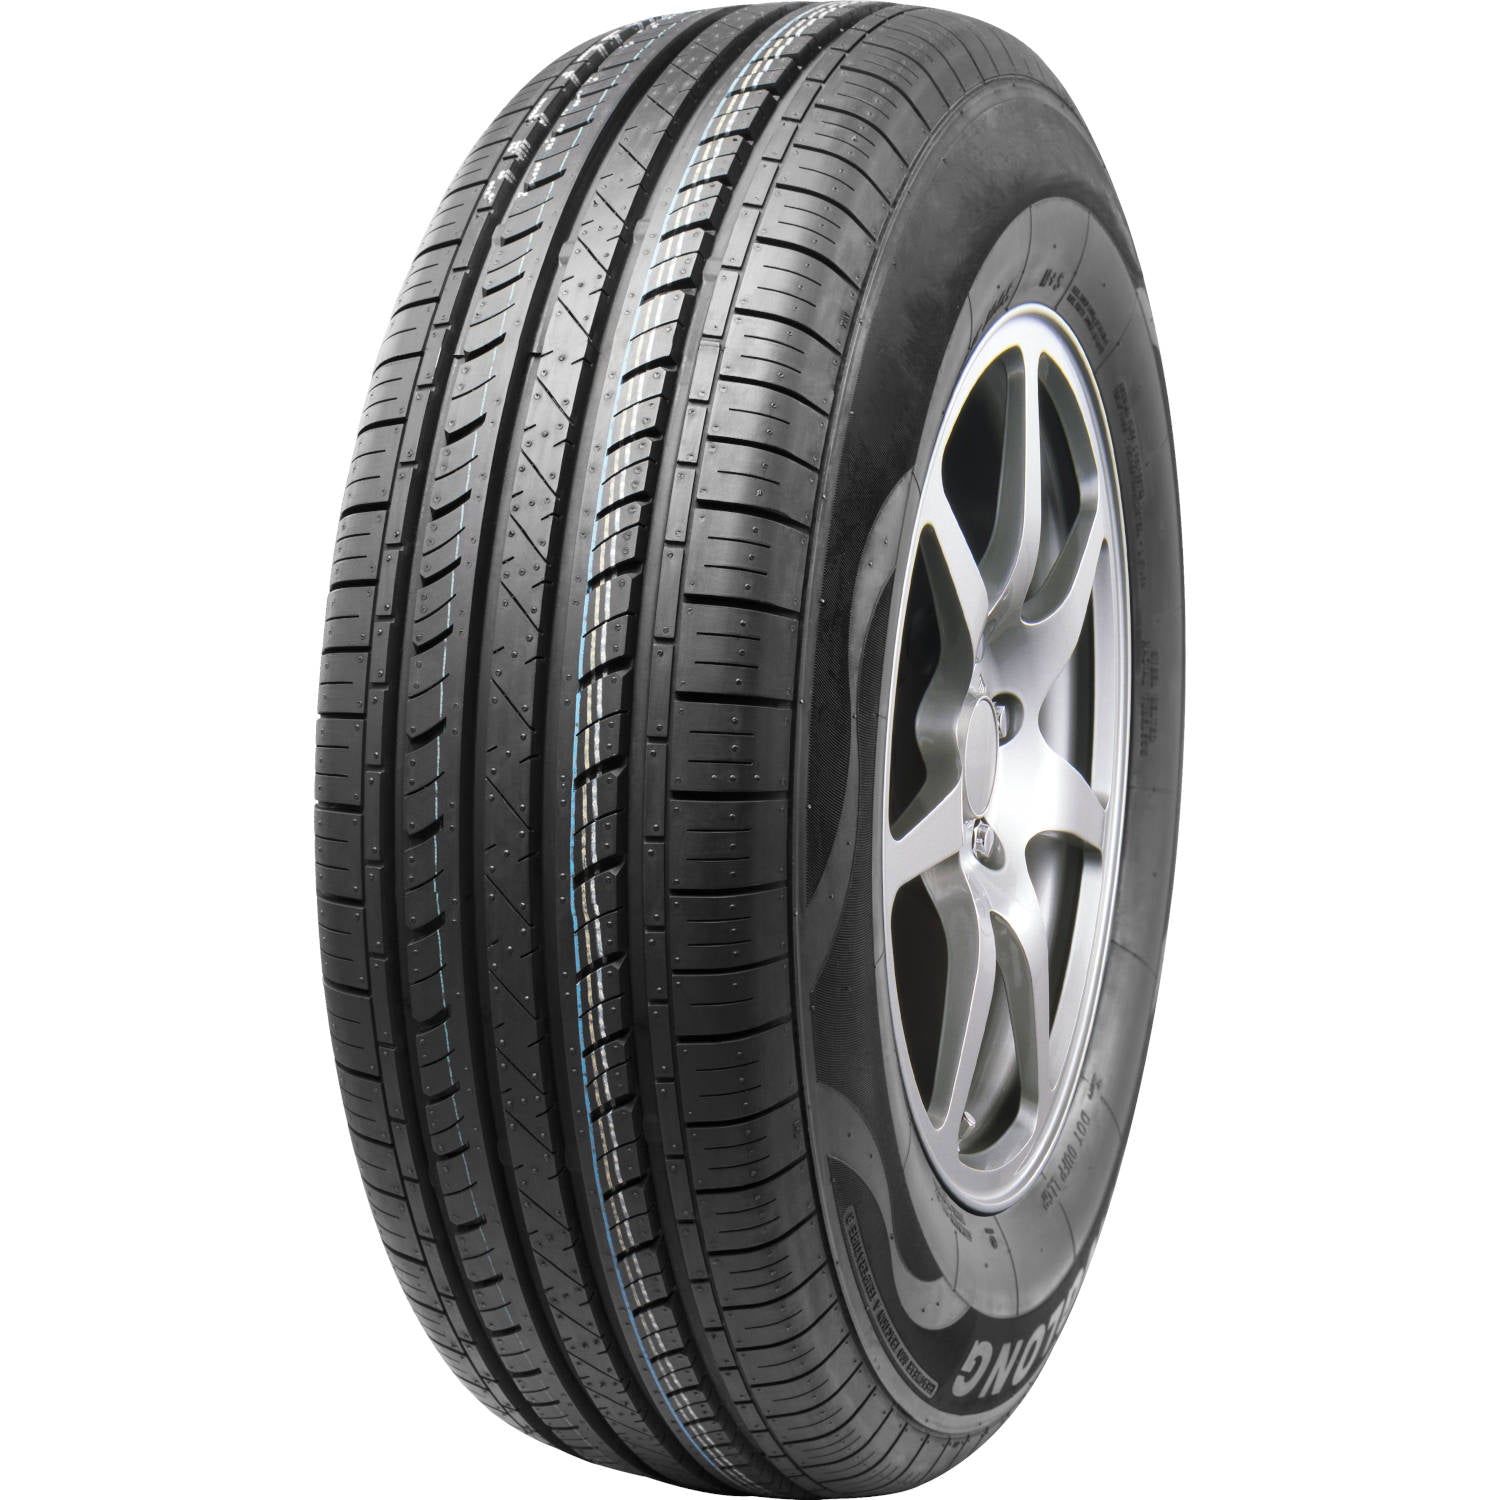 ROAD ONE CAVALRY A/S 195/65R15 (25X7.7R 15) Tires